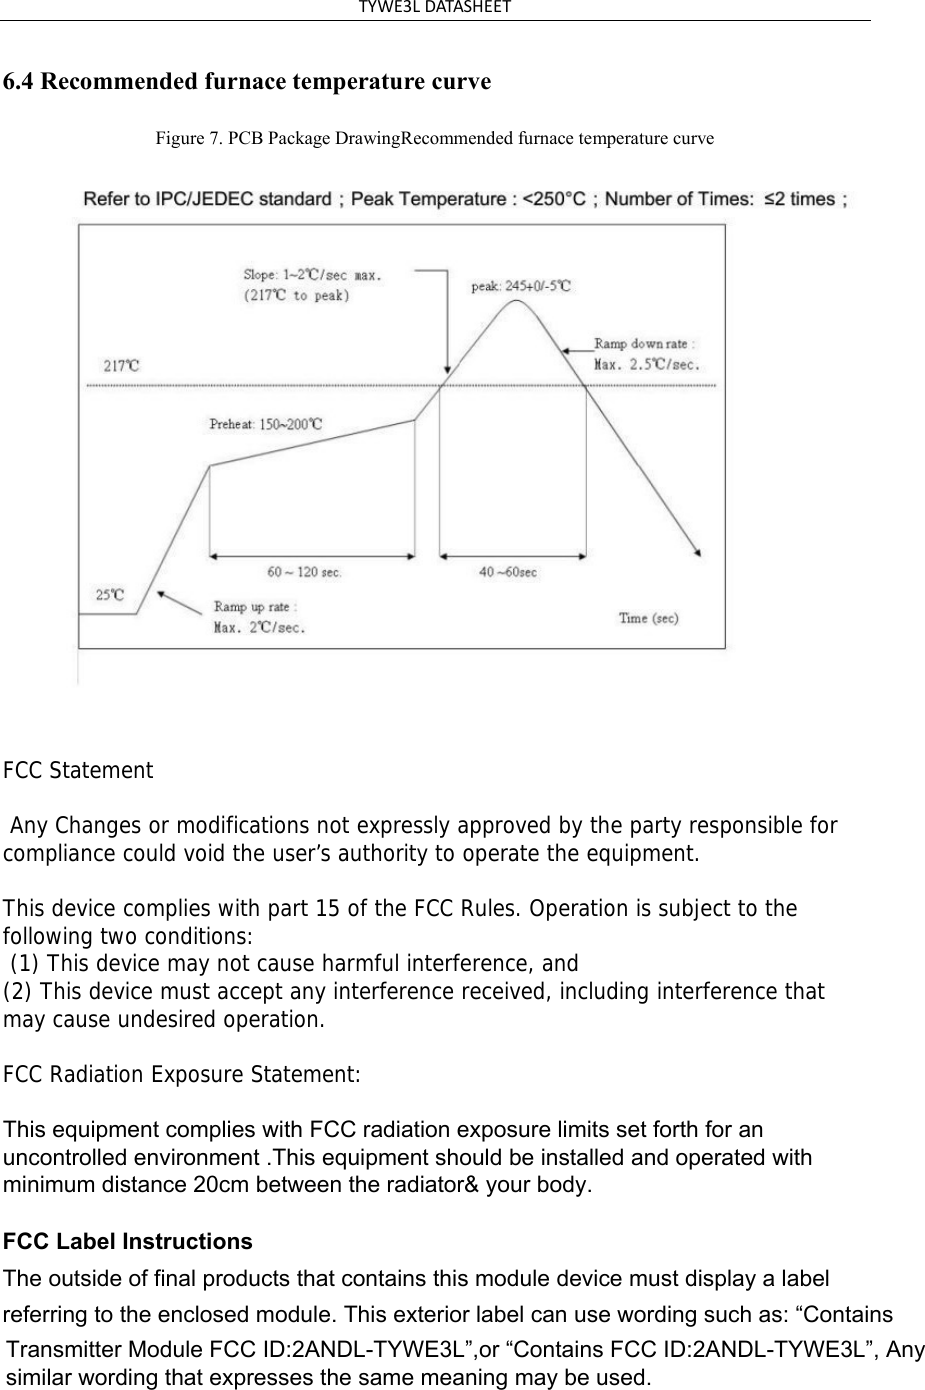 TYWE3L DATASHEET 6.4 Recommended furnace temperature curve Figure 7. PCB Package DrawingRecommended furnace temperature curve FCC Statement  Any Changes or modifications not expressly approved by the party responsible for compliance could void the user’s authority to operate the equipment.    This device complies with part 15 of the FCC Rules. Operation is subject to the following two conditions:  (1) This device may not cause harmful interference, and   (2) This device must accept any interference received, including interference that may cause undesired operation.     FCC Radiation Exposure Statement: This equipment complies with FCC radiation exposure limits set forth for an uncontrolled environment .This equipment should be installed and operated with minimum distance 20cm between the radiator&amp; your body.    FCC Label InstructionsThe outside of final products that contains this module device must display a label referring to the enclosed module. This exterior label can use wording such as: “Contains Transmitter Module FCC ID:2ANDL-TYWE3L”,or “Contains FCC ID:2ANDL-TYWE3L”, Any similar wording that expresses the same meaning may be used. 